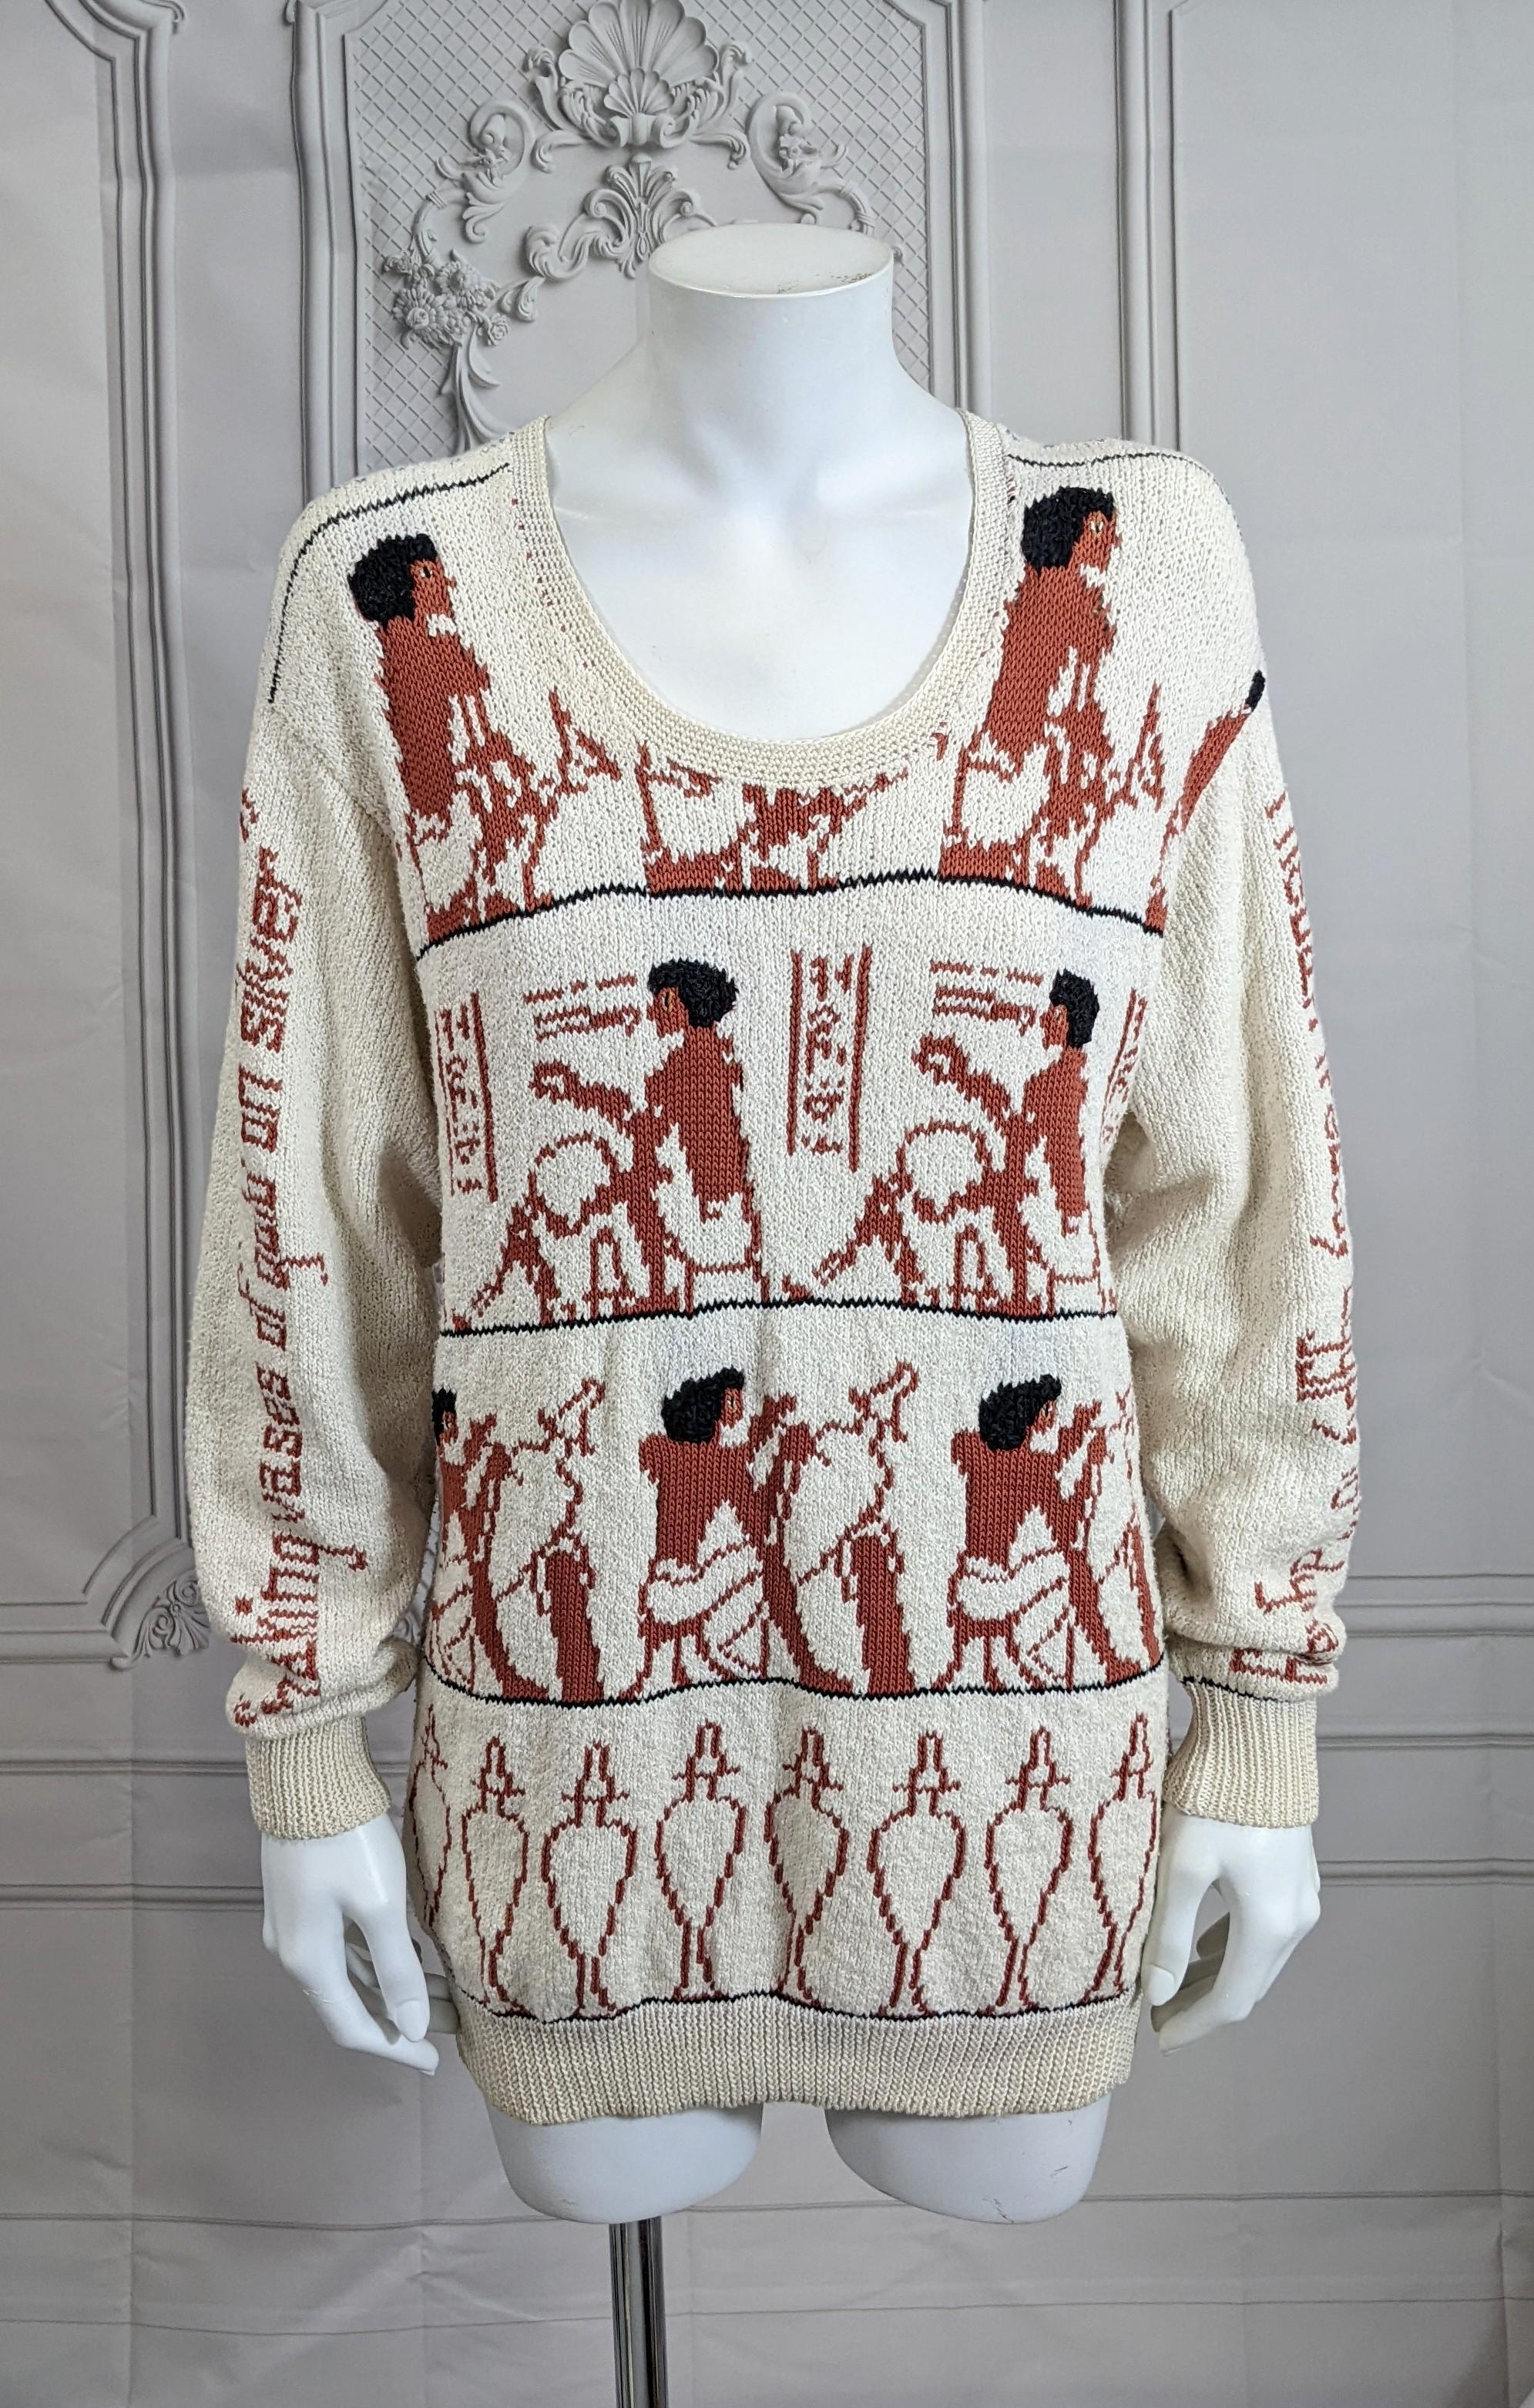 Charming and unusual Handknit Cotton Eygptian Themed Sweater by Dia North of Boston circa 1980's. Motifs include the creation of silver and gold urns and the process is described running down each sleeve.  Size S/M. Vermont 1980's. 
Bust 34